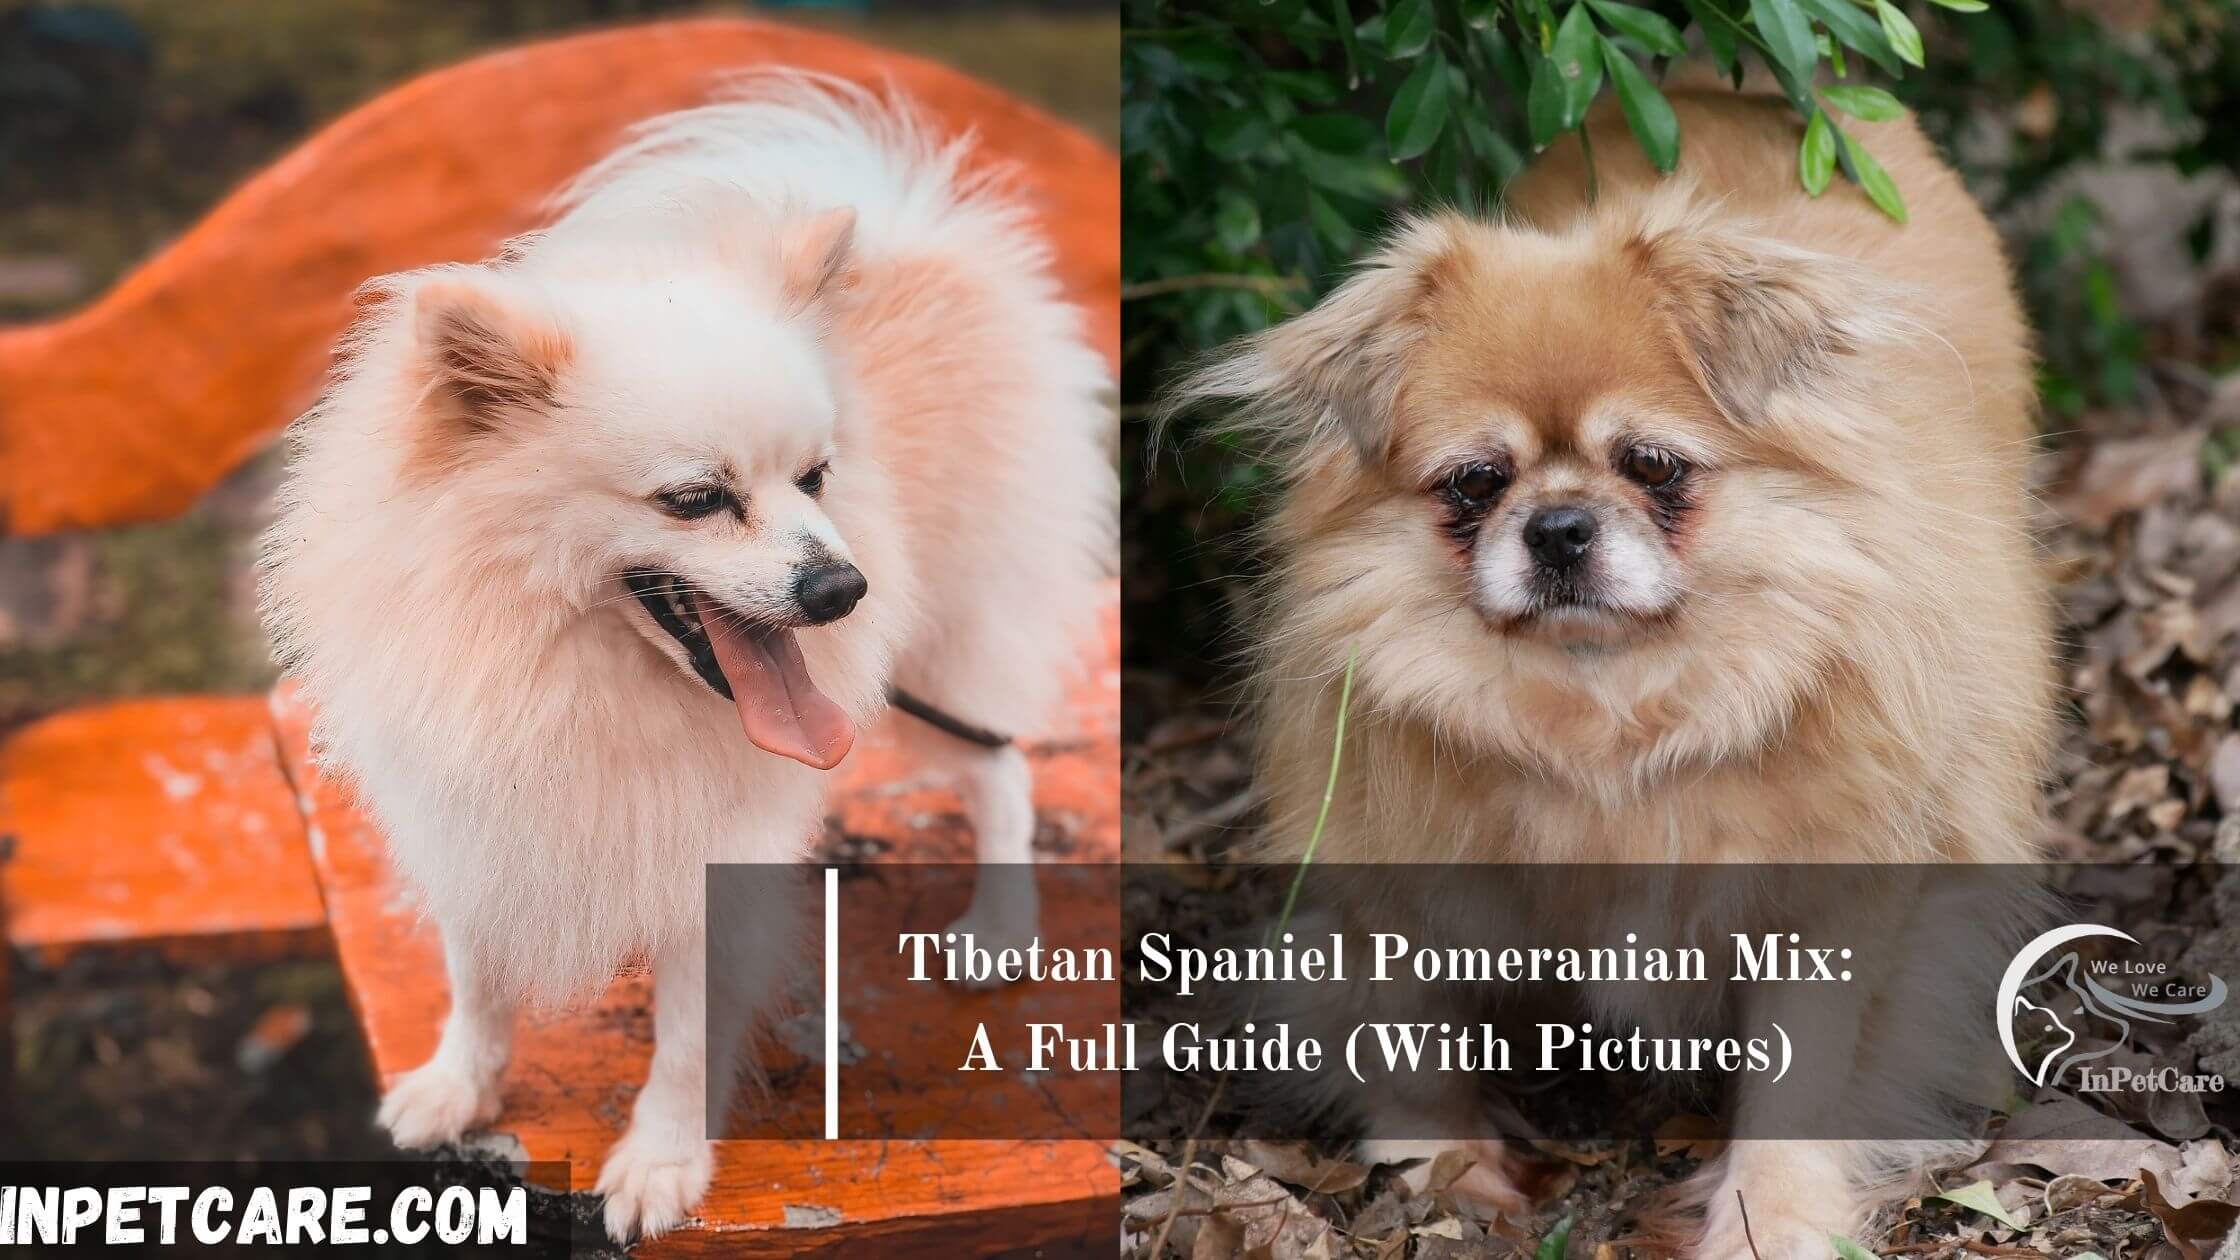 Tibetan Spaniel Pomeranian Mix: A Full Guide (With Pictures)